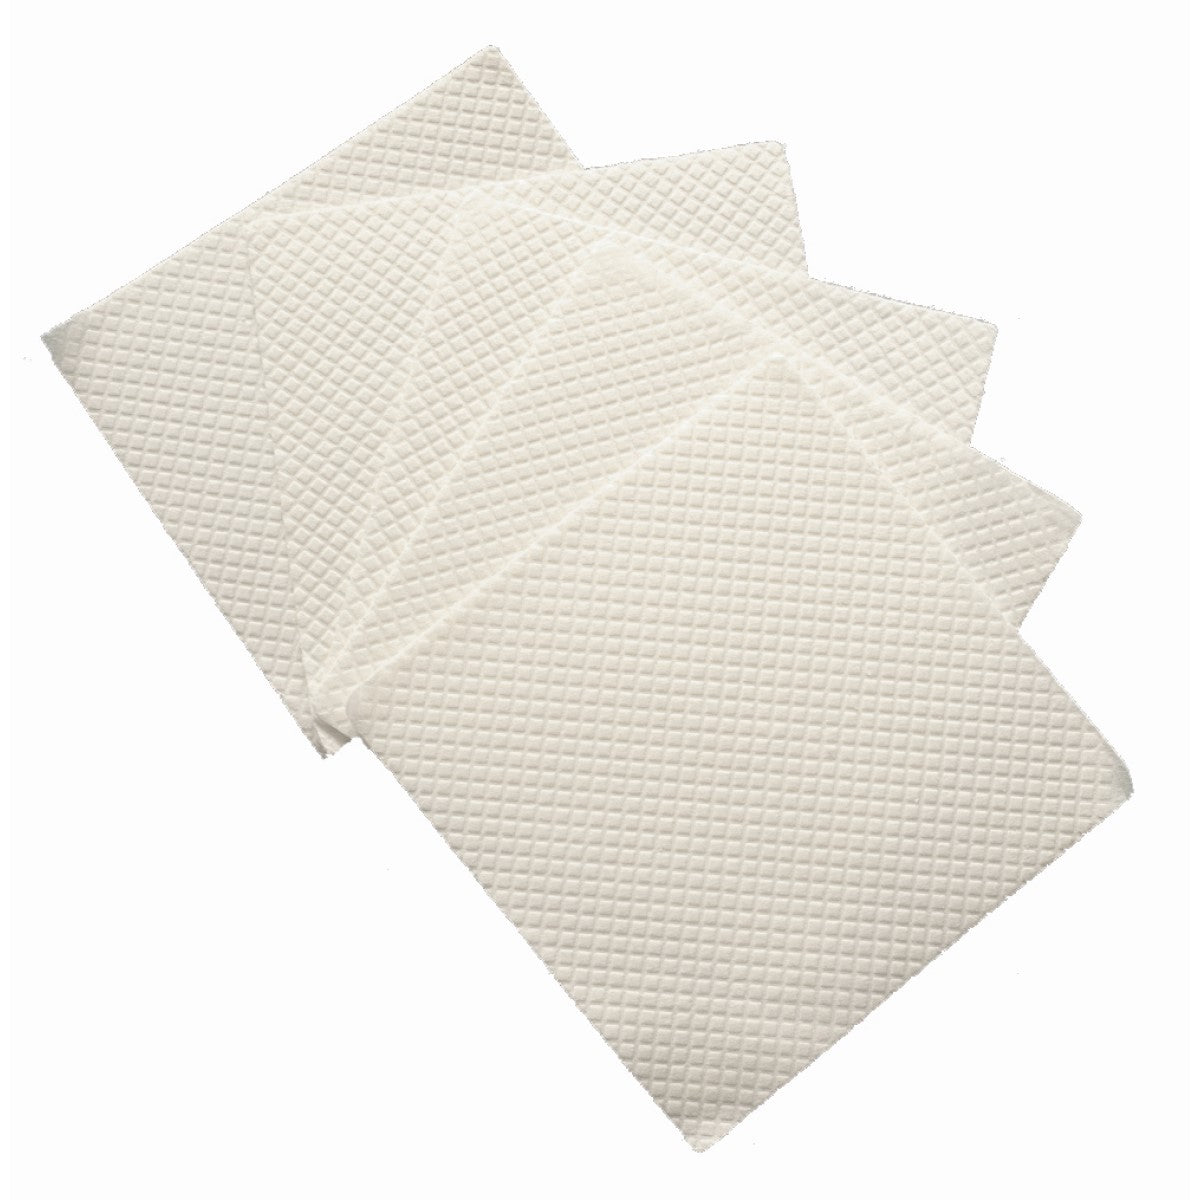 Versapak Pack of Absorbent Pads - Medical Carriers